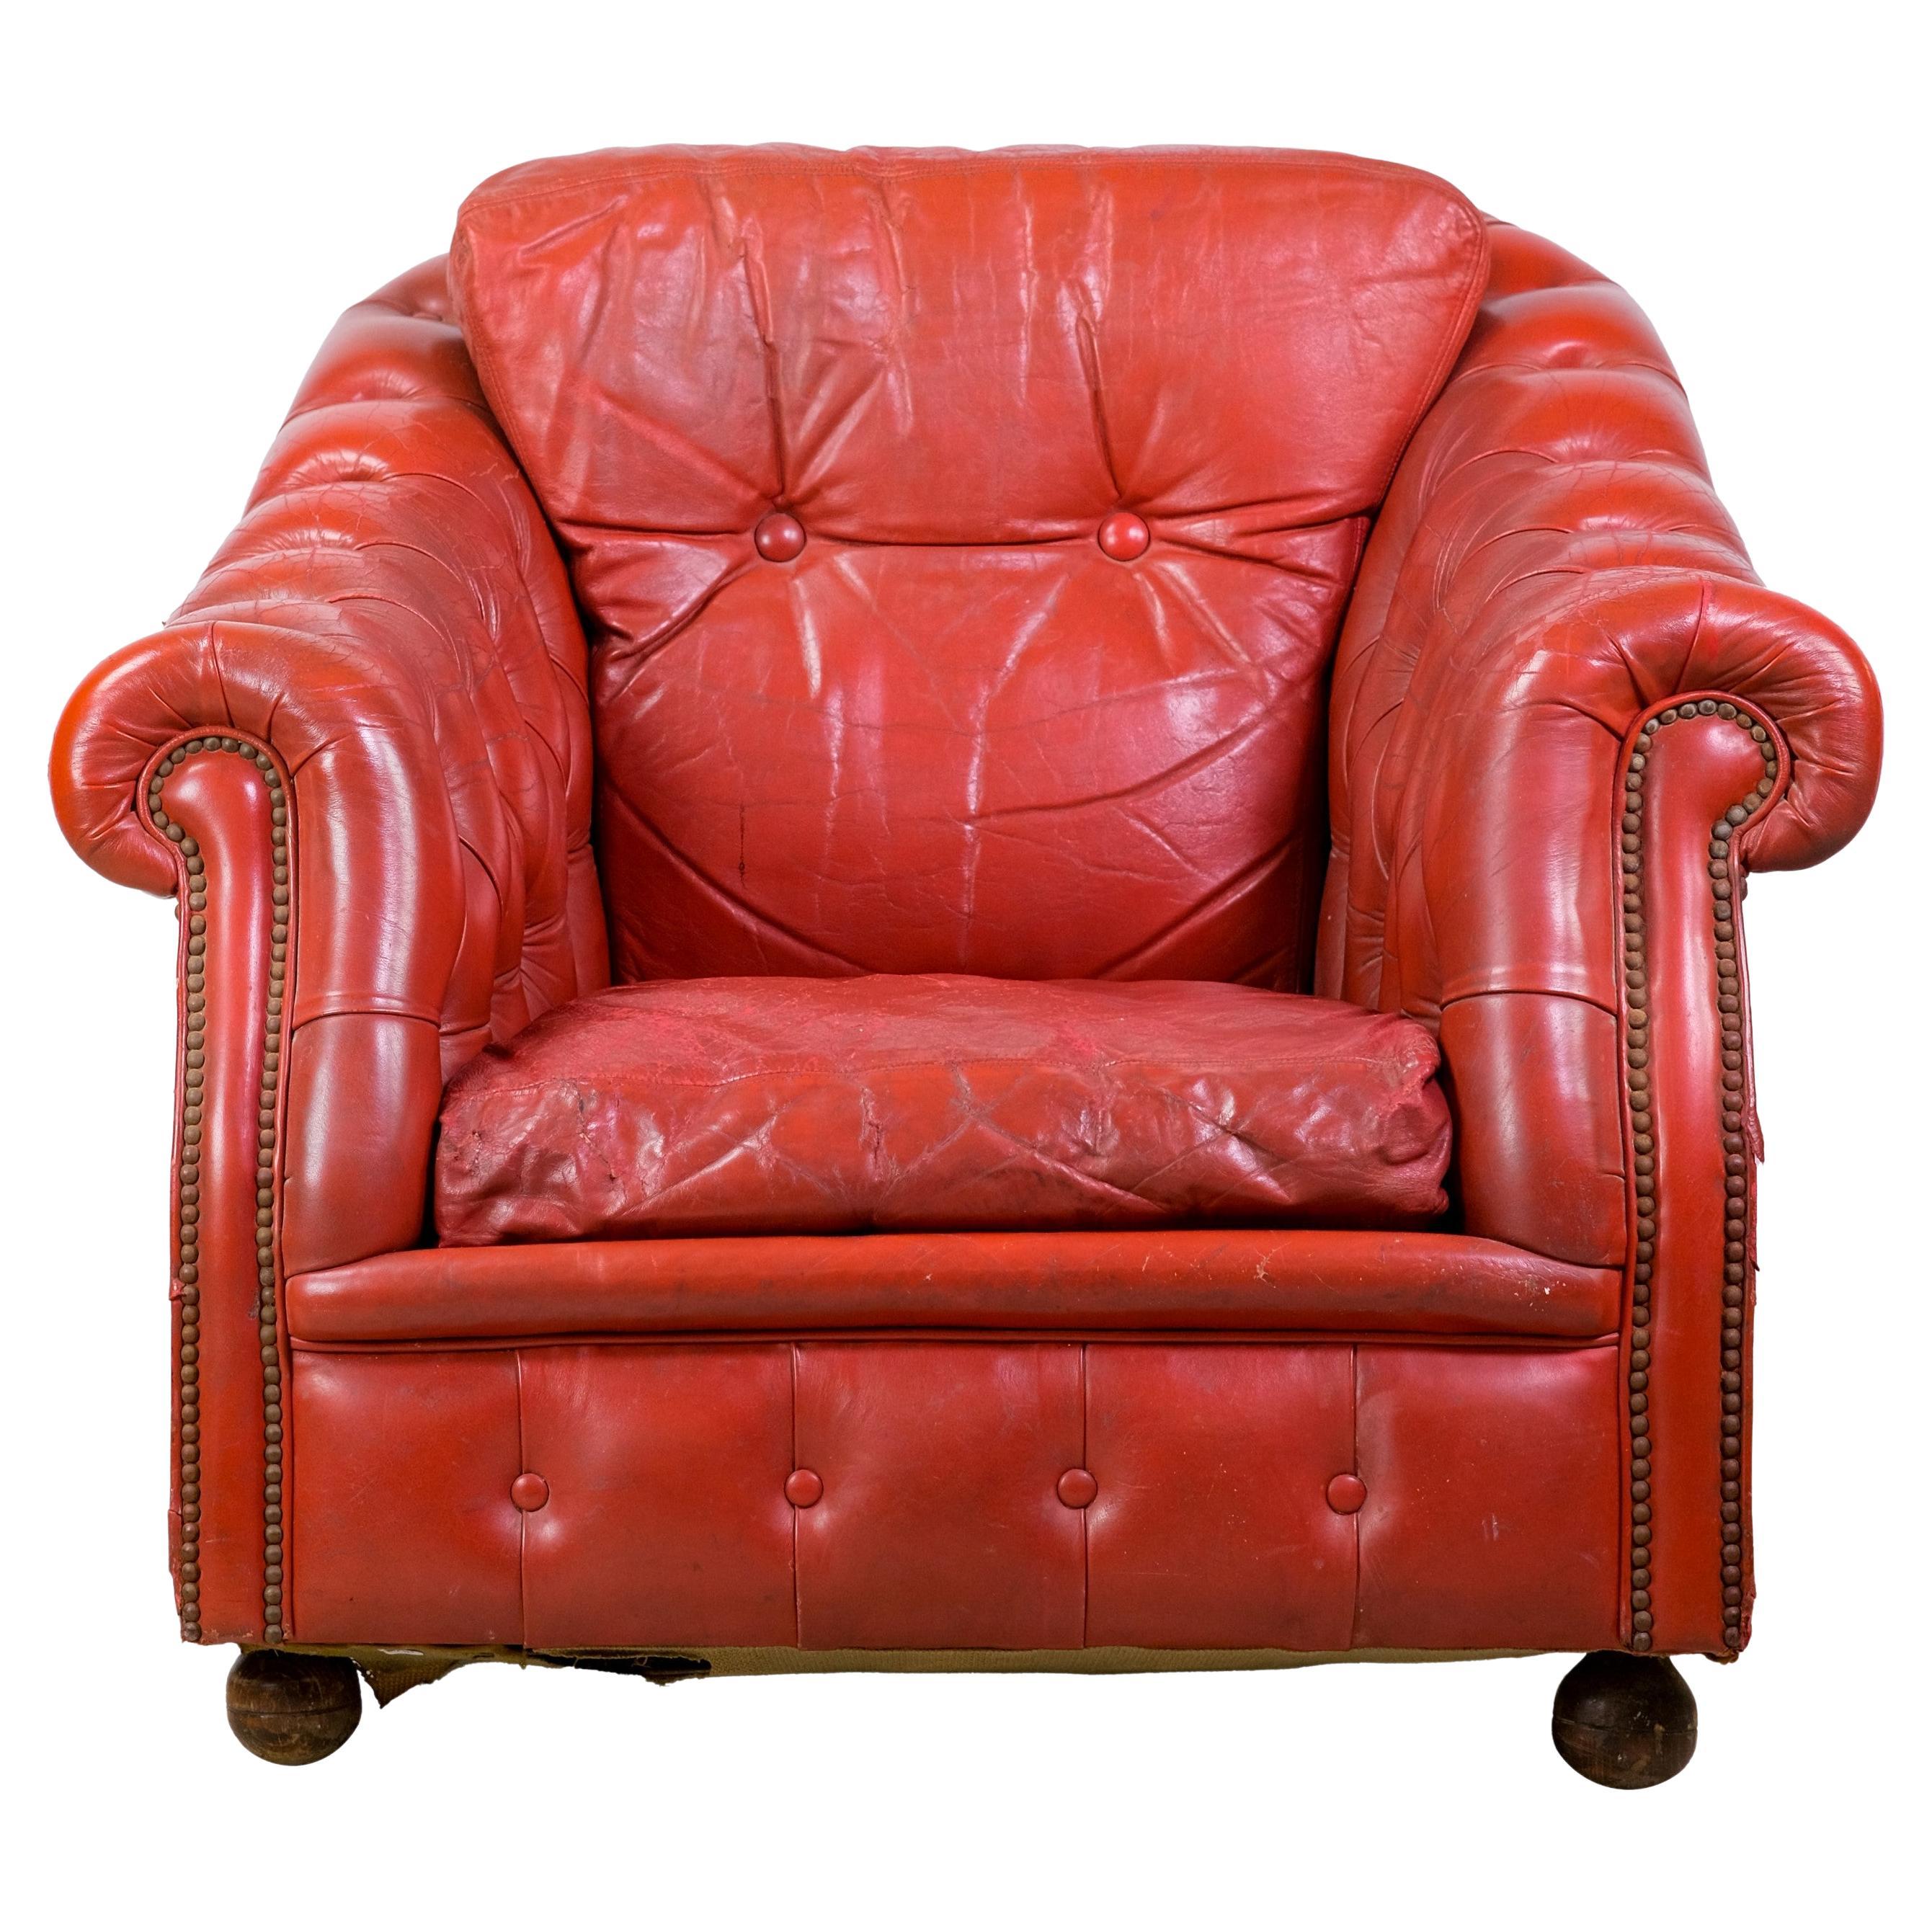 Chesterfield Buttoned Tufted Red Leather Armchair with Rolled Arms